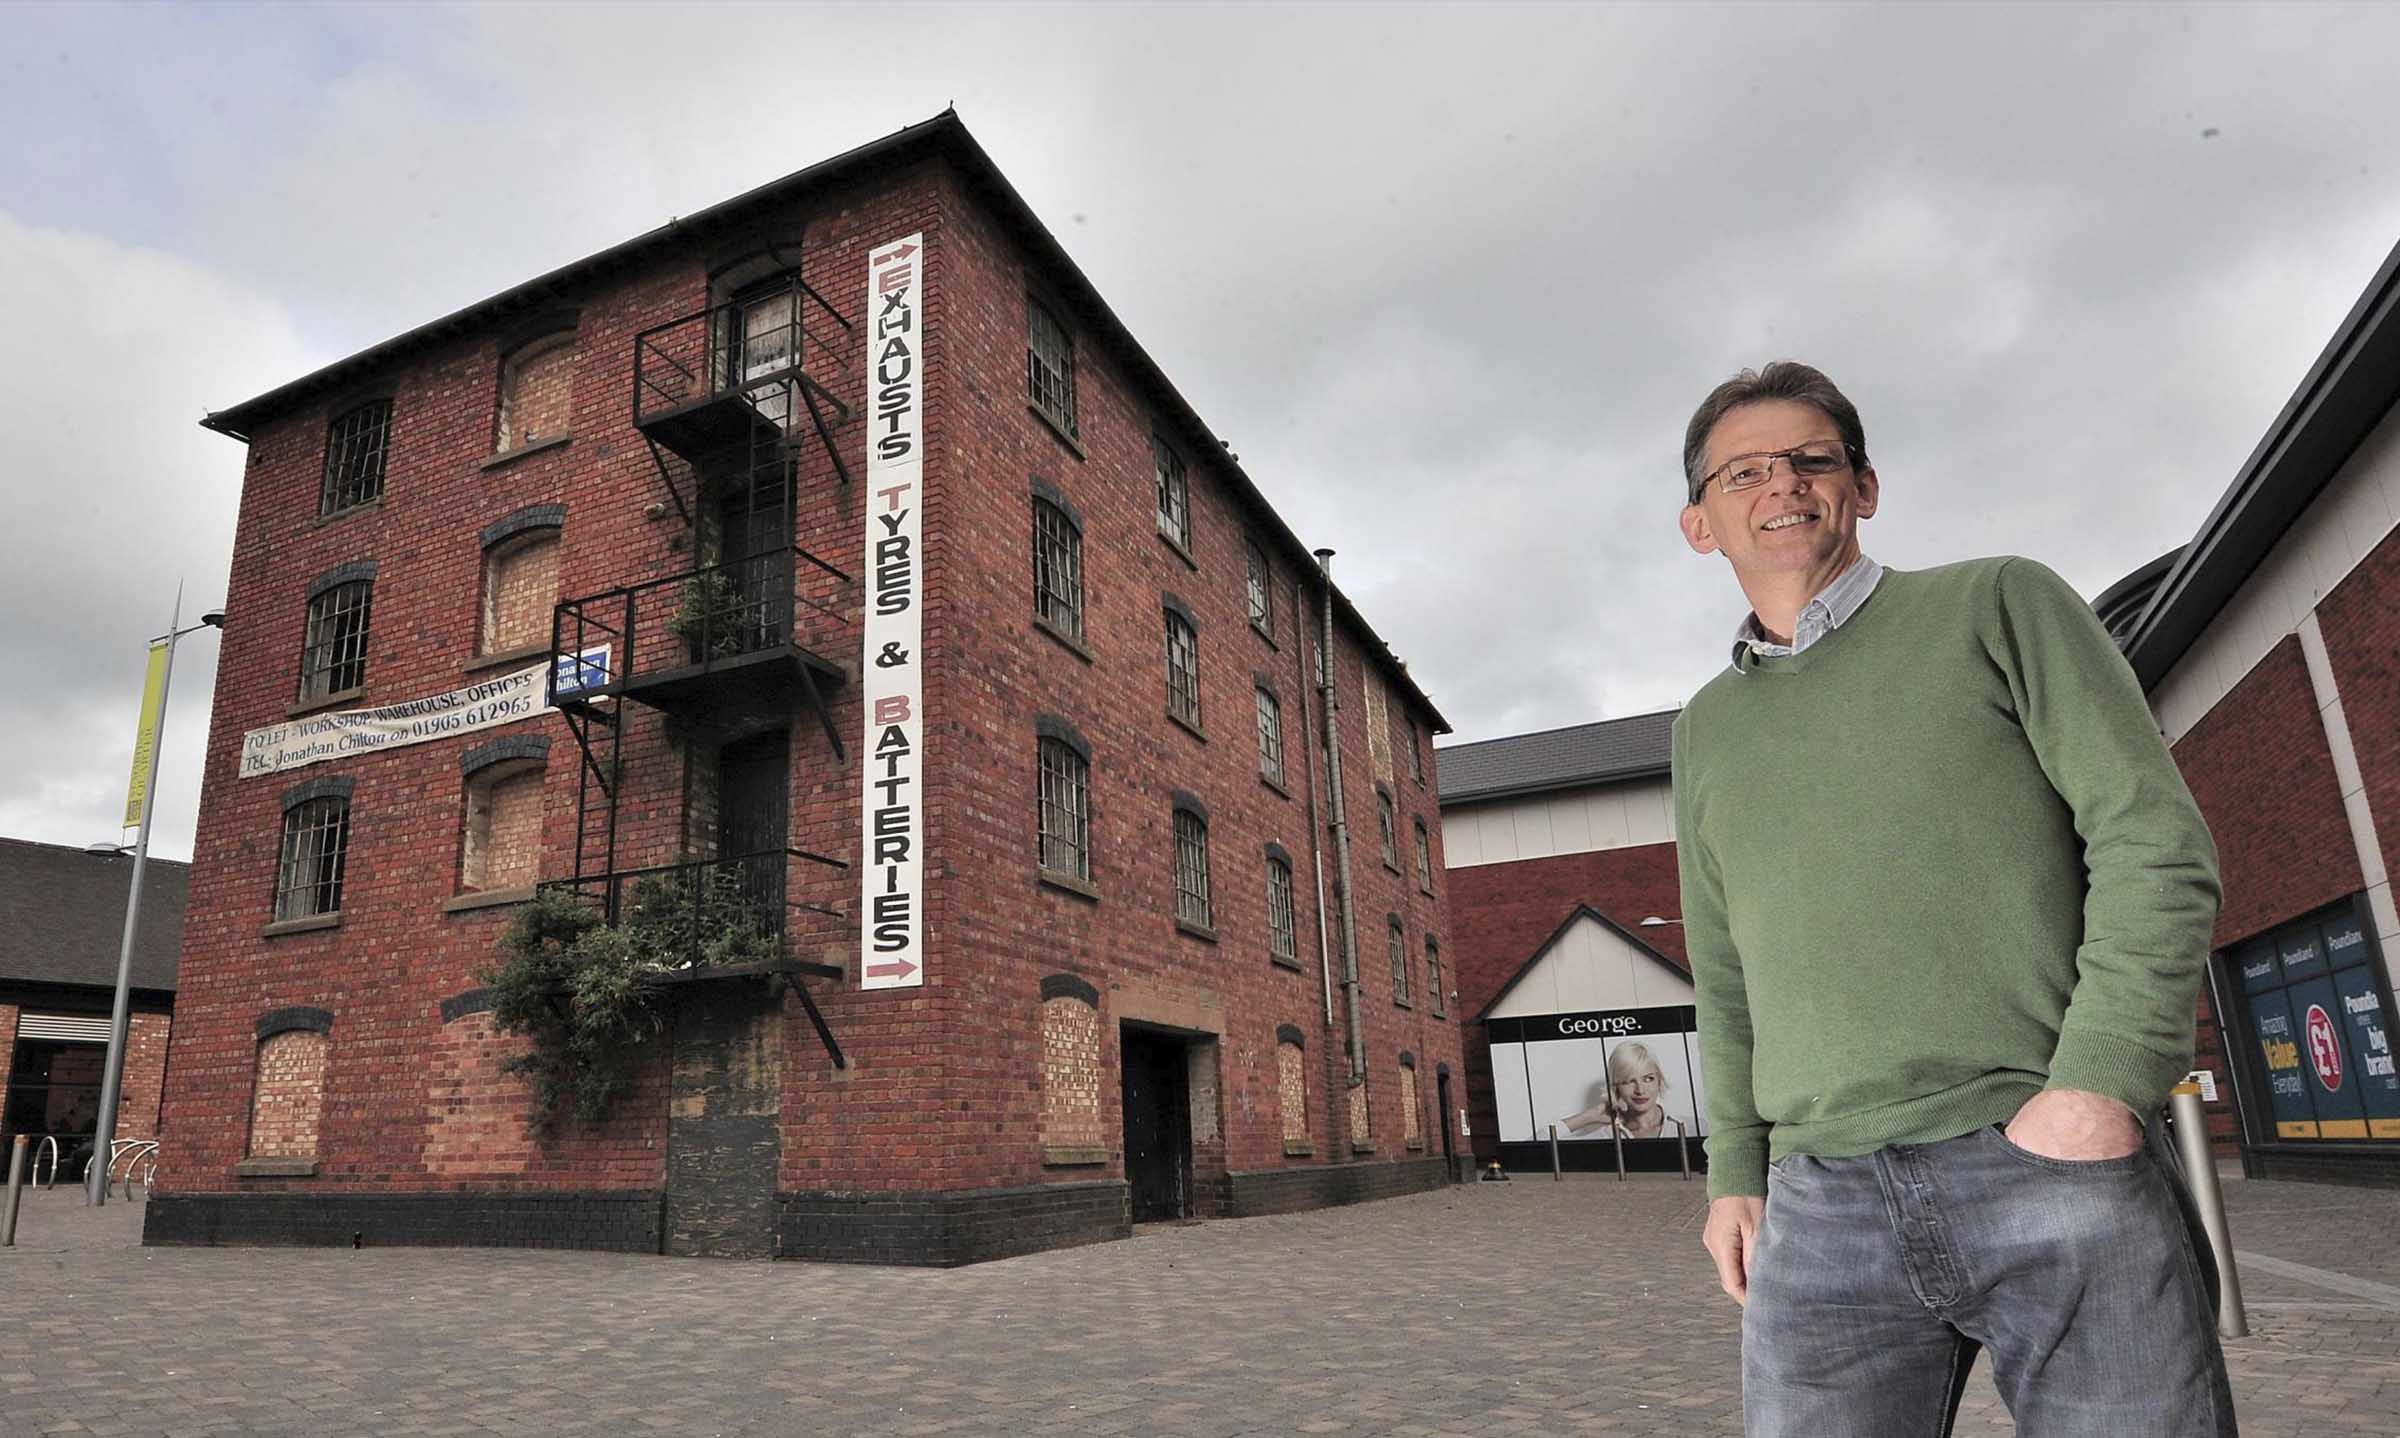 Man stood outside old granary building